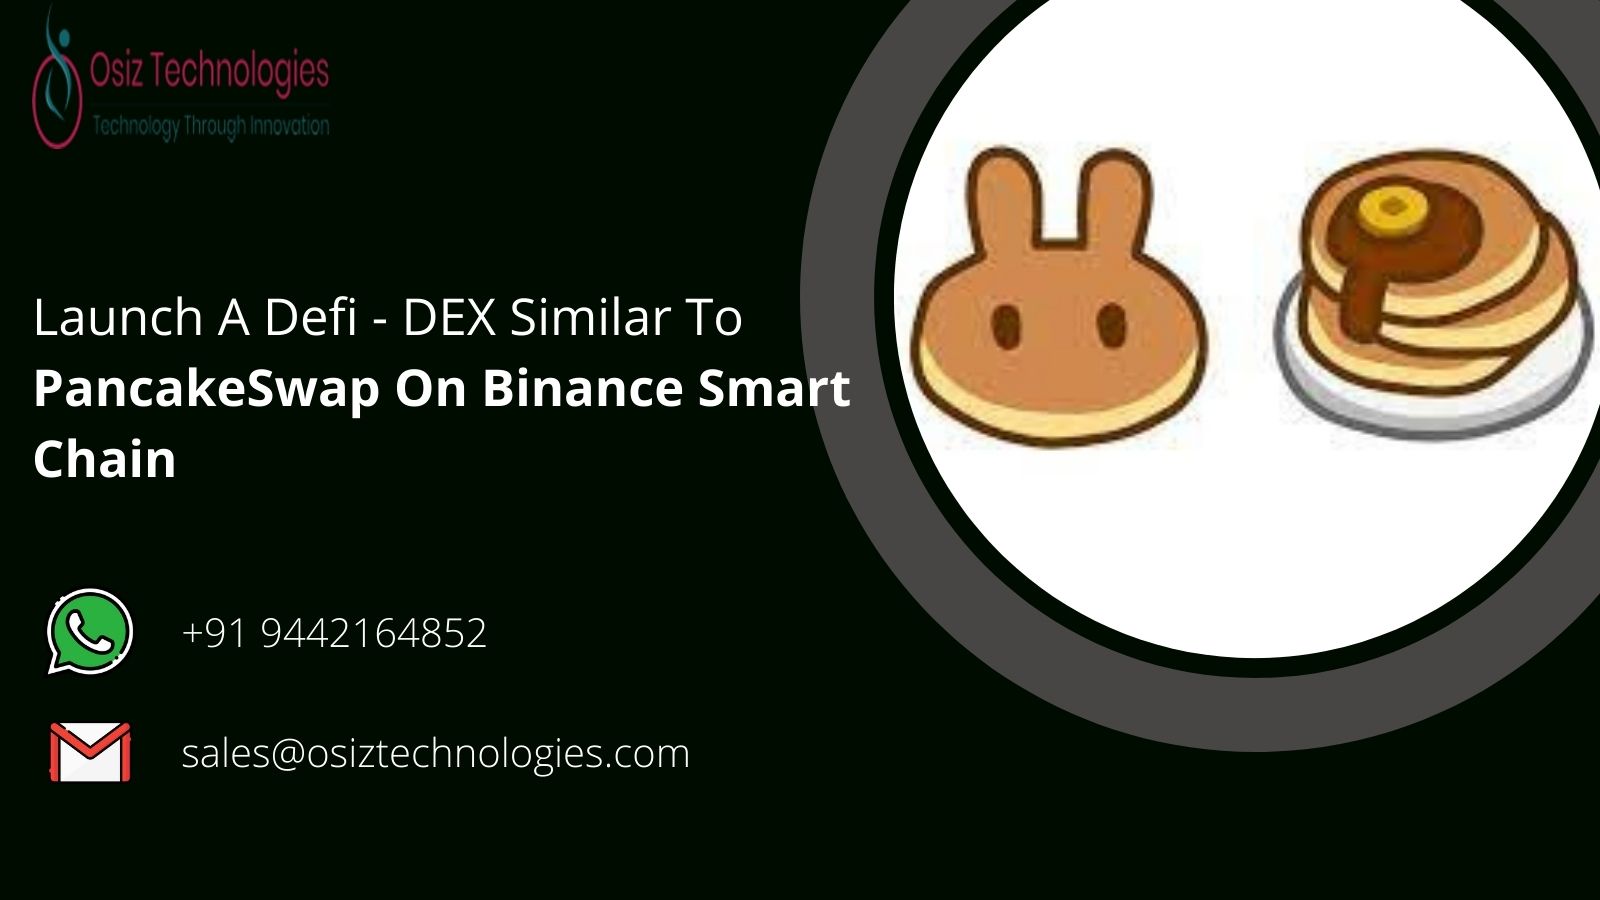 Article about Launch A Defi - DEX Similar To PancakeSwap On Binance Smart Chain.